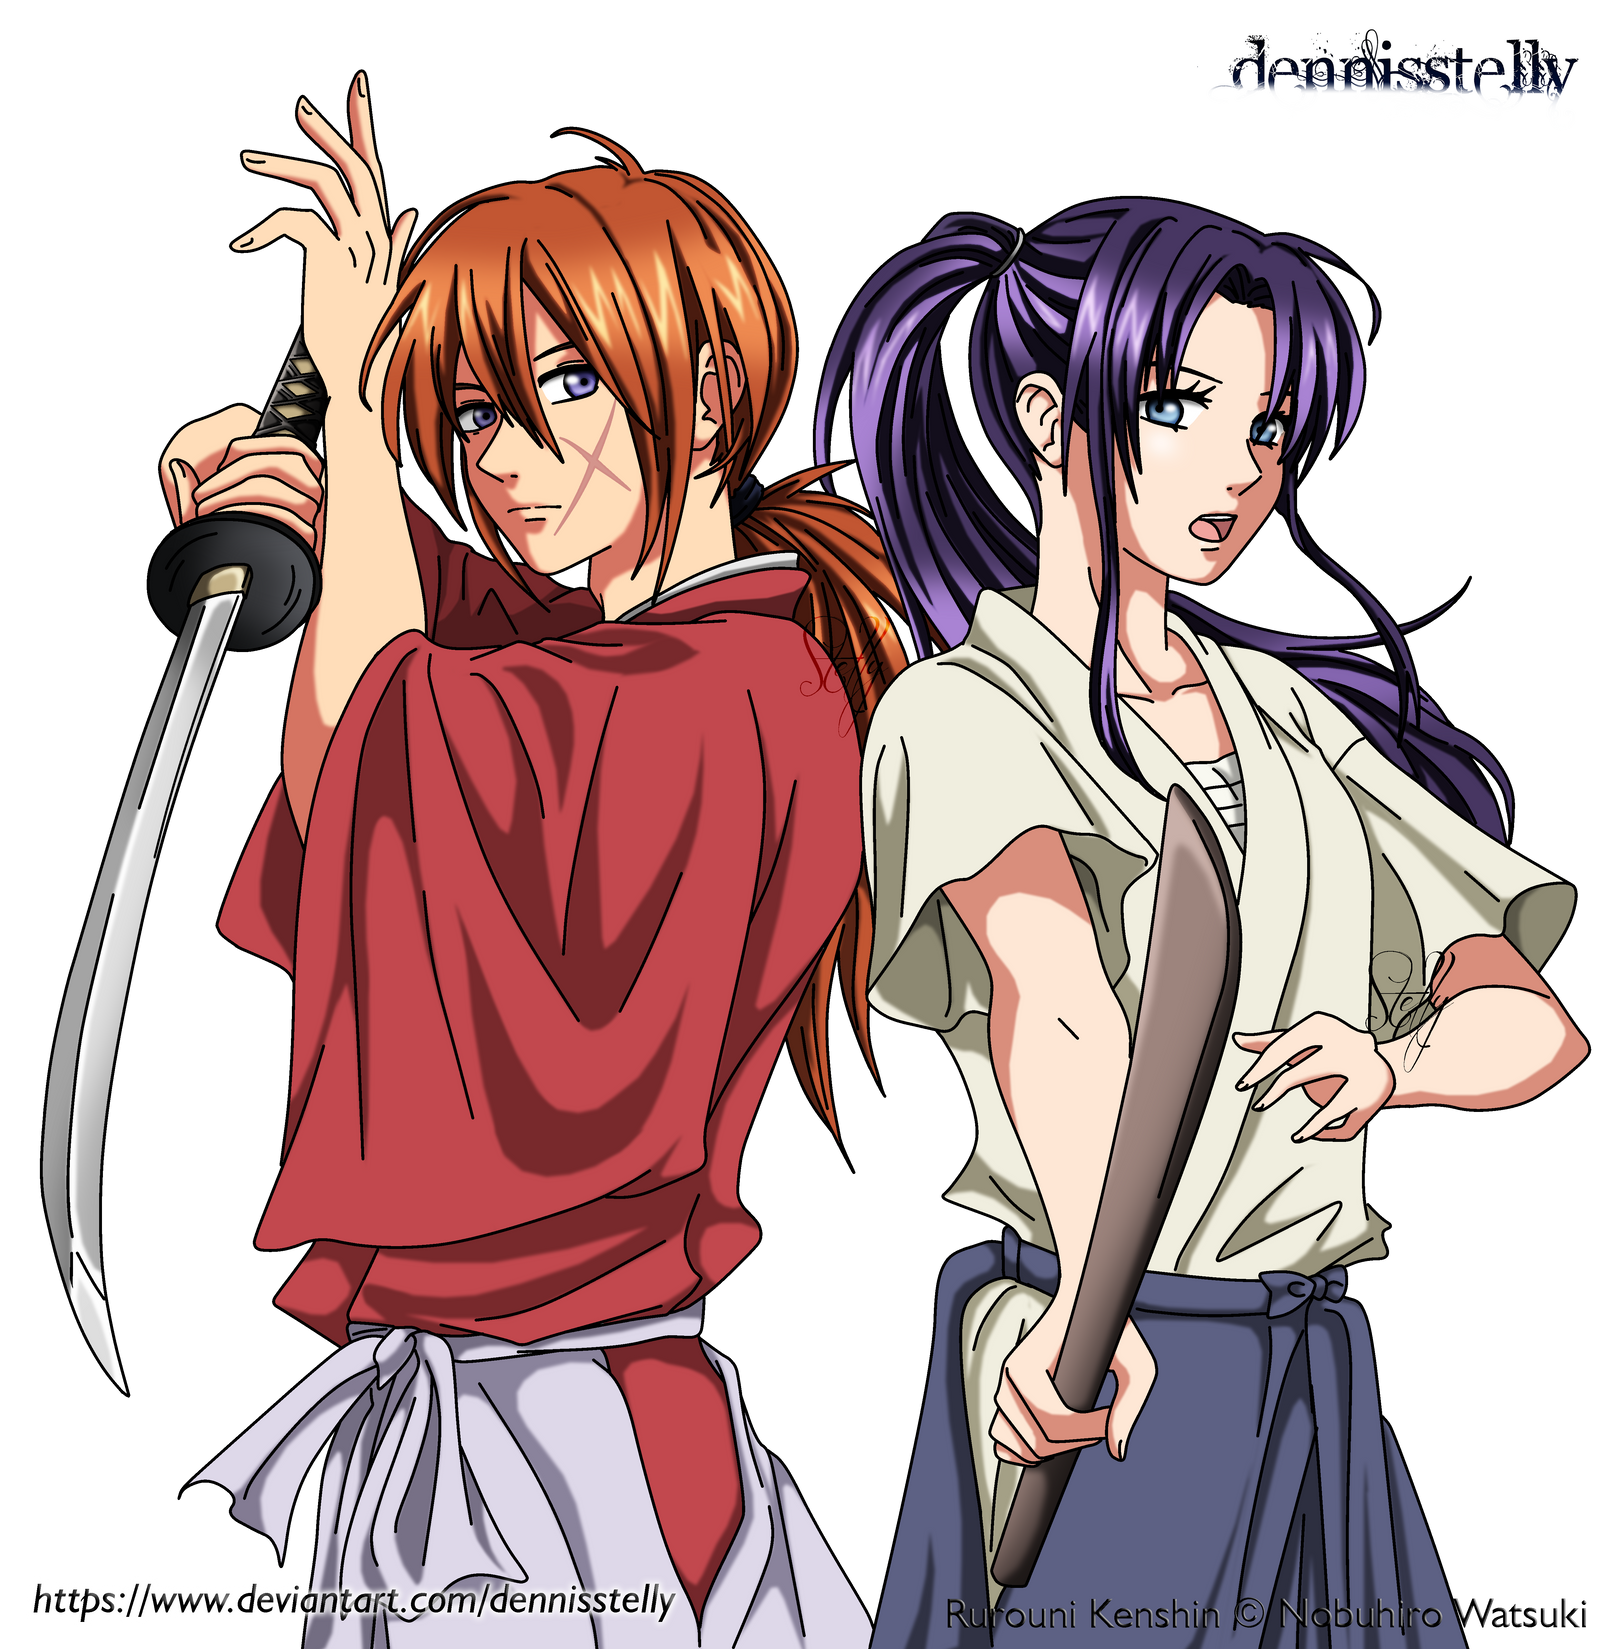 Kenshin and Kaoru - Colored by DennisStelly on DeviantArt